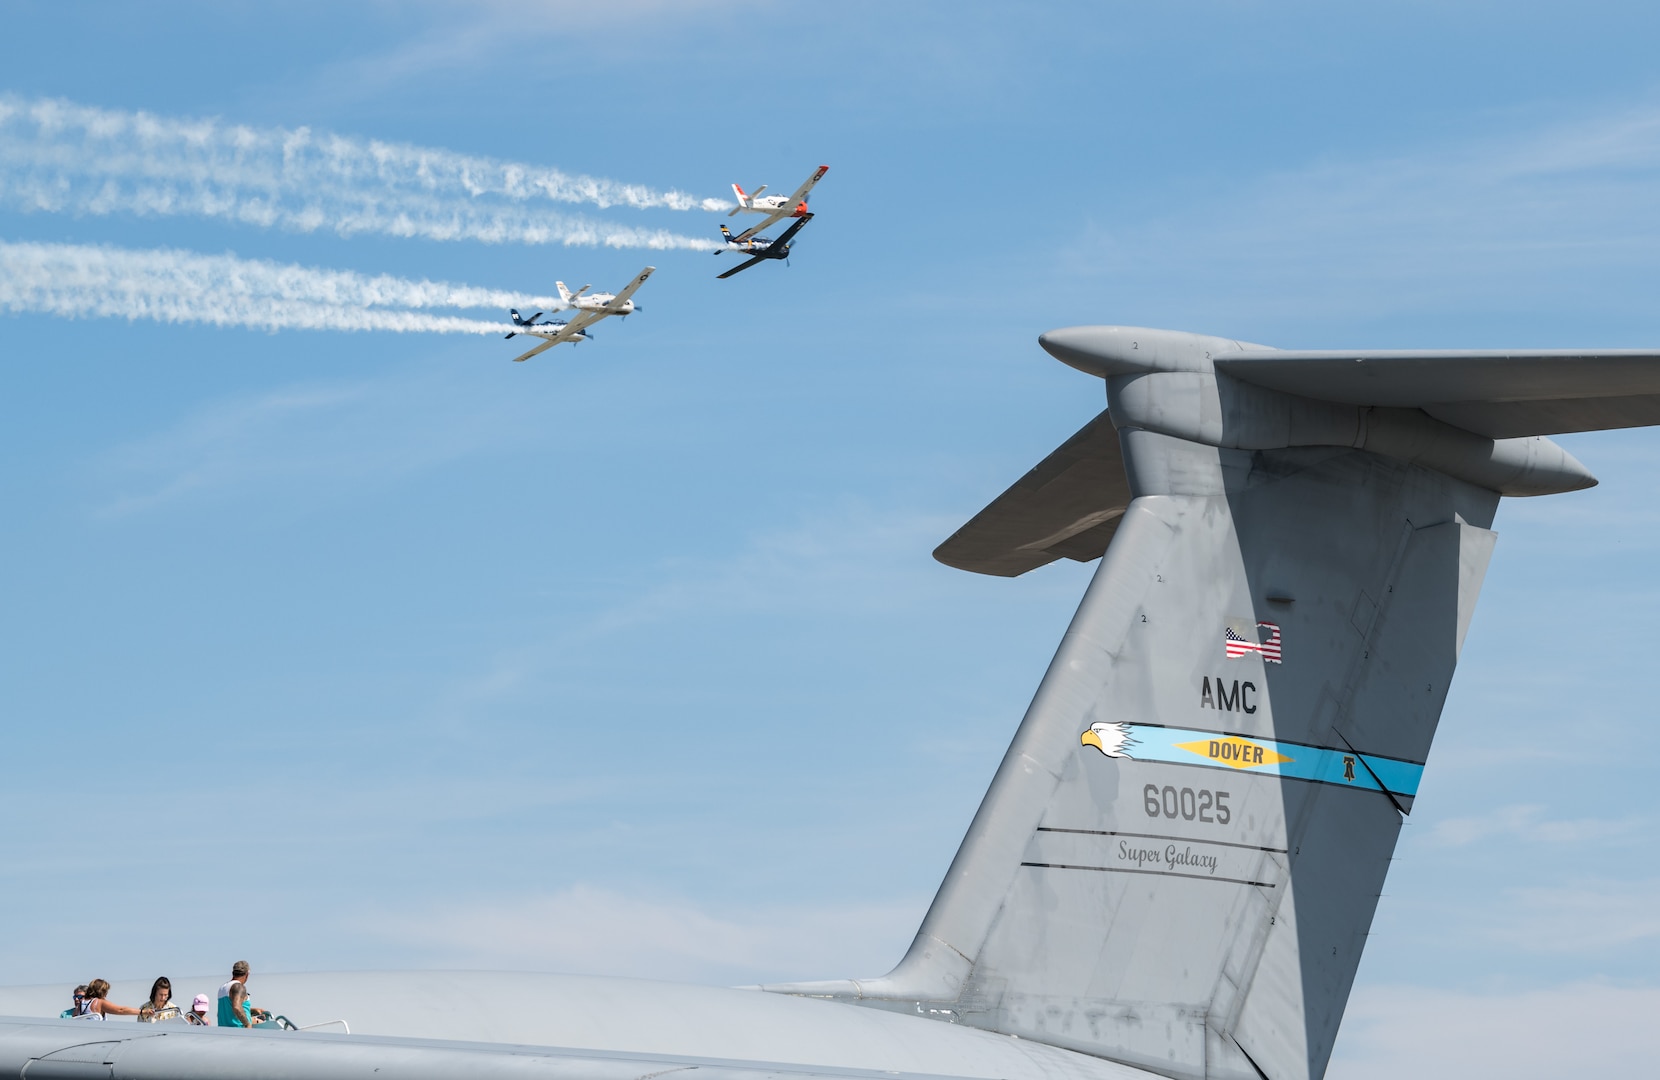 Thunder Over Dover 2019 celebrates Air Force heritage, future